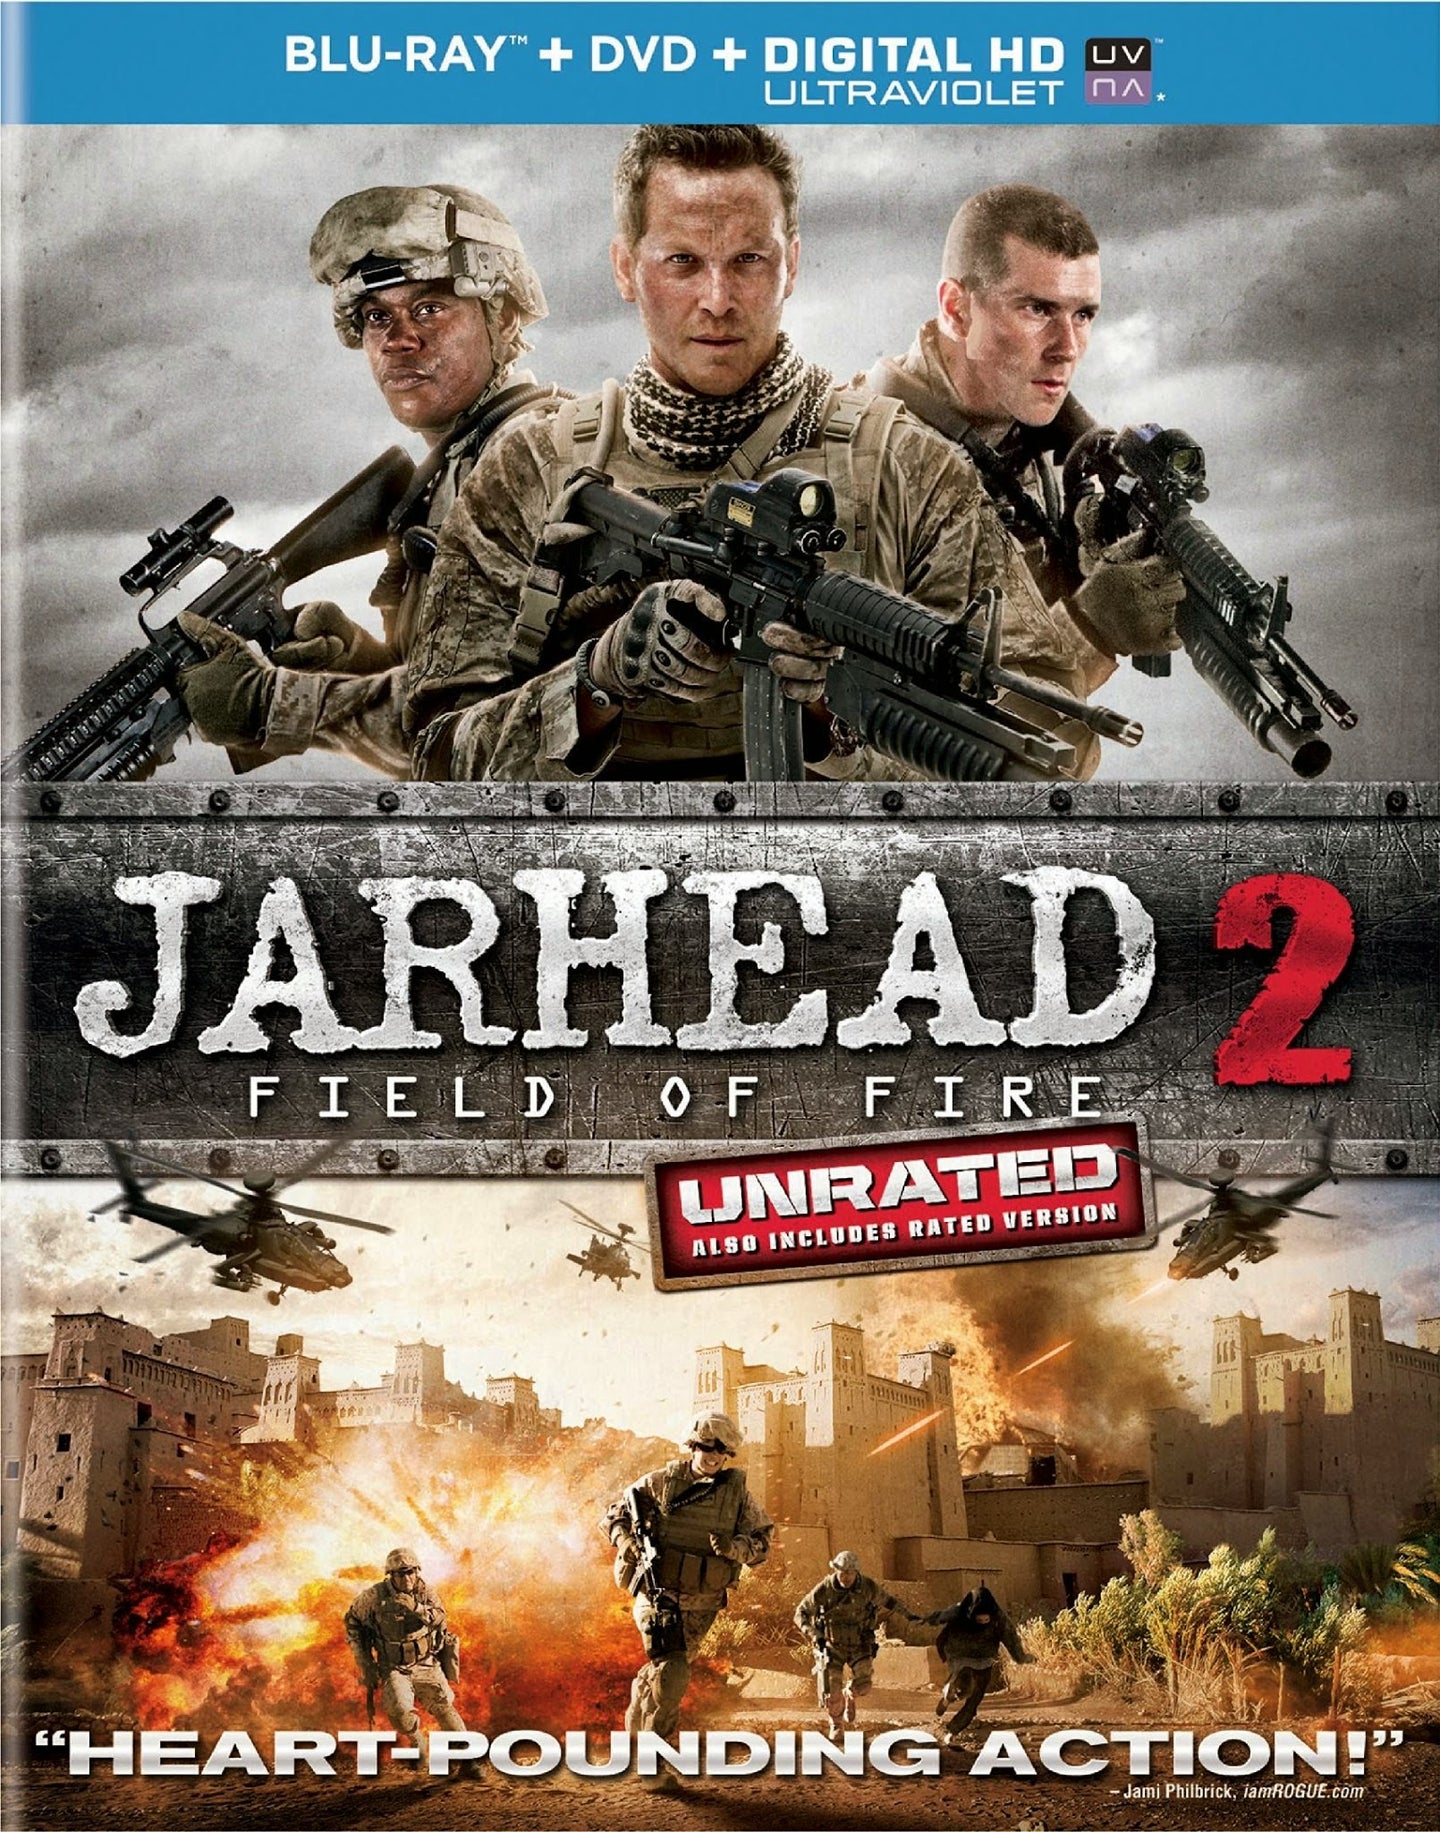 Jarhead 2: Field of Fire [Unrated Edition] (2014) Vudu or Movies Anywhere HD redemption only